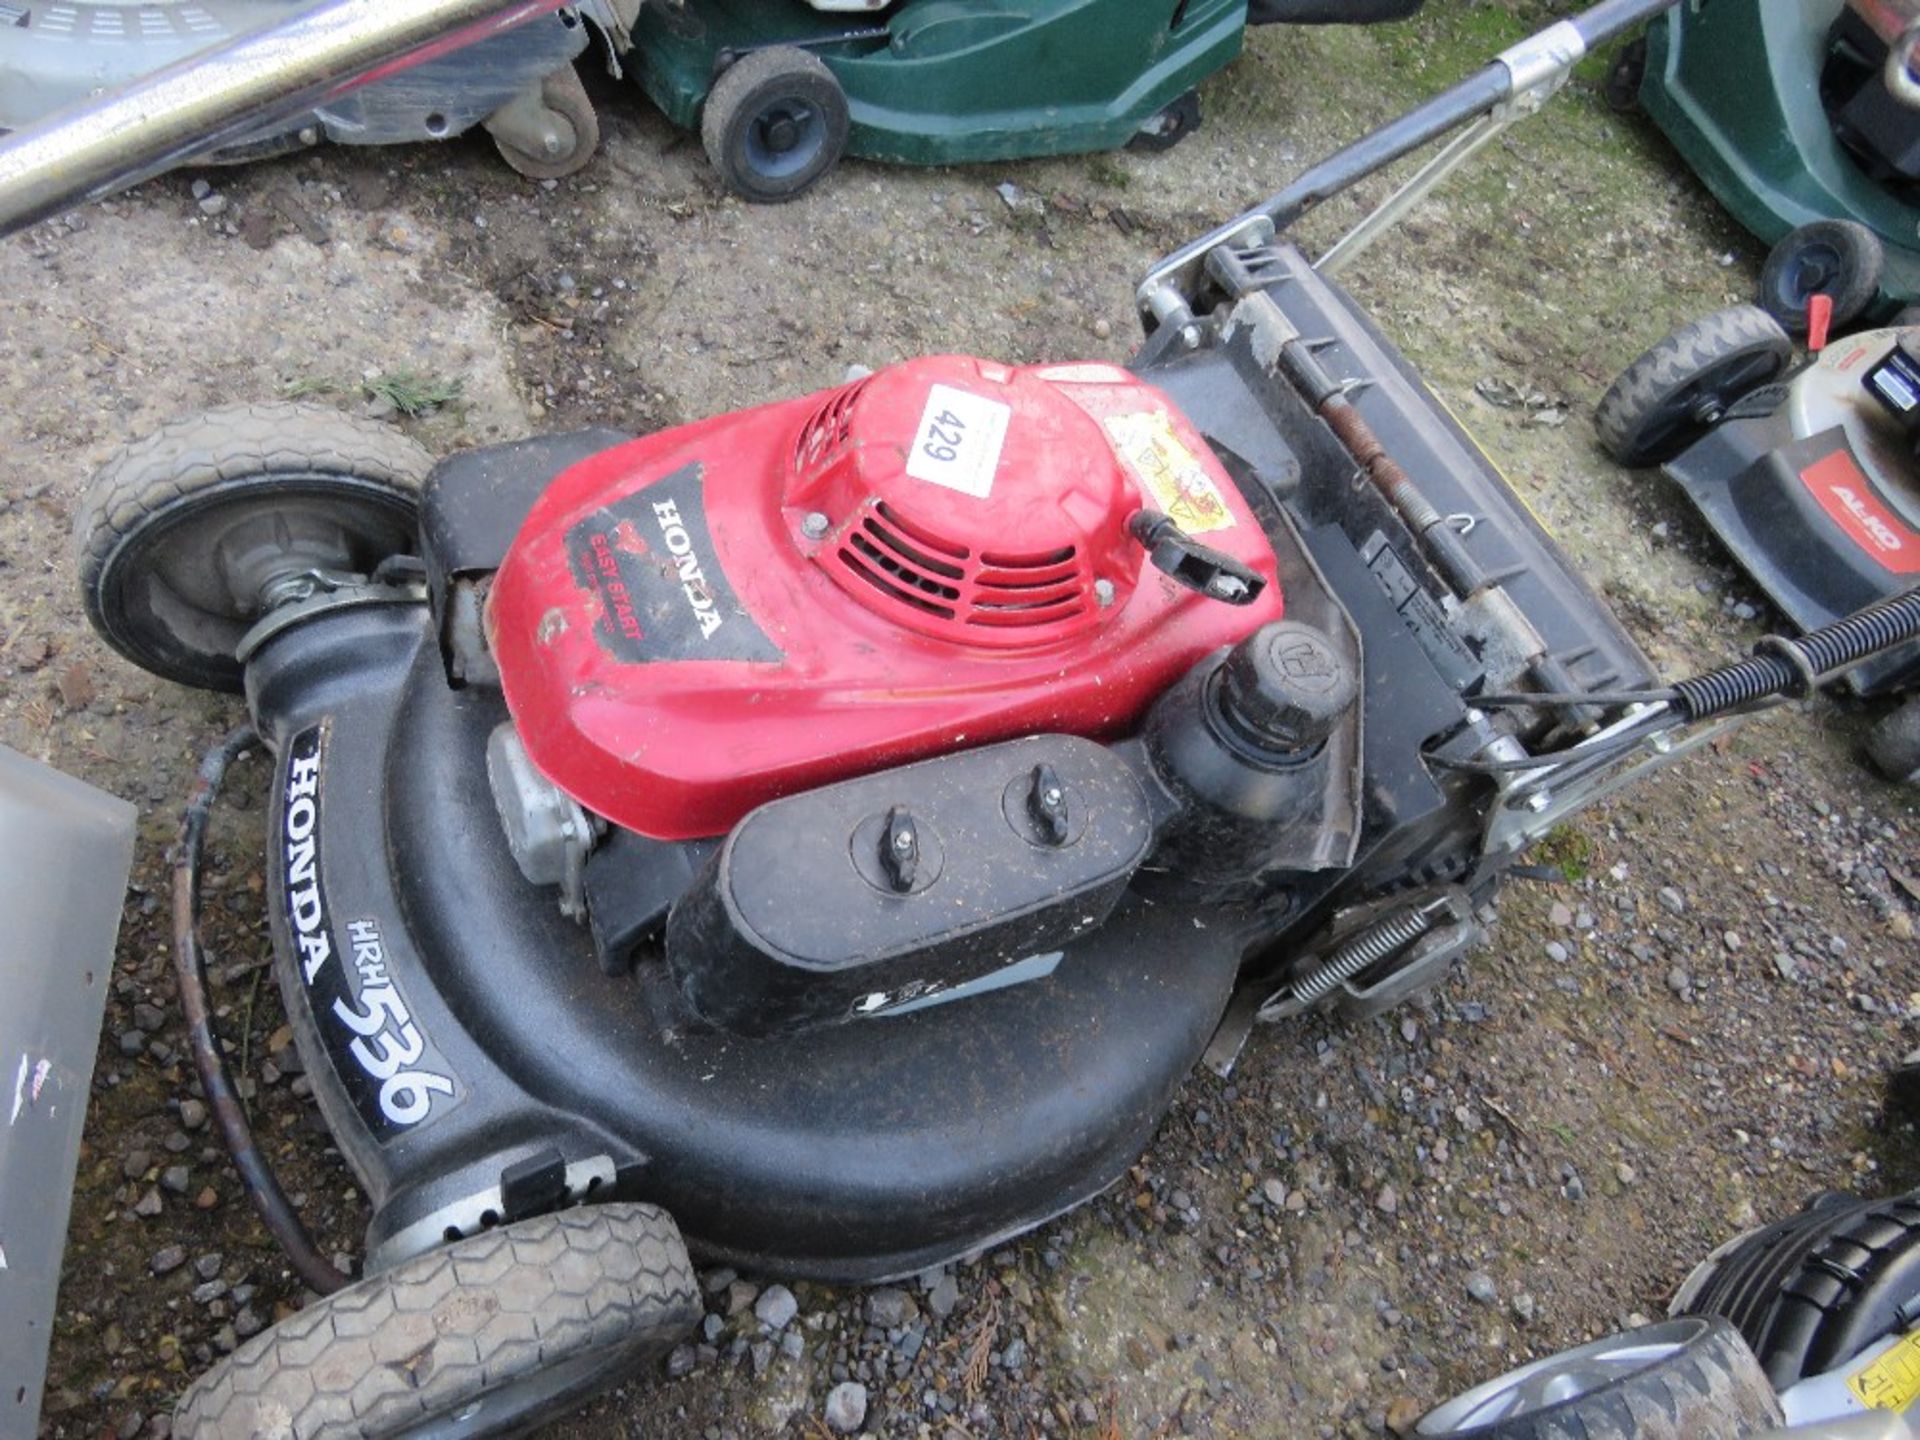 HONDA HR536 PETROL ENGINED ROLLER LAWNMOWER , NO COLLECTOR. THIS LOT IS SOLD UNDER THE AUCTIONEERS